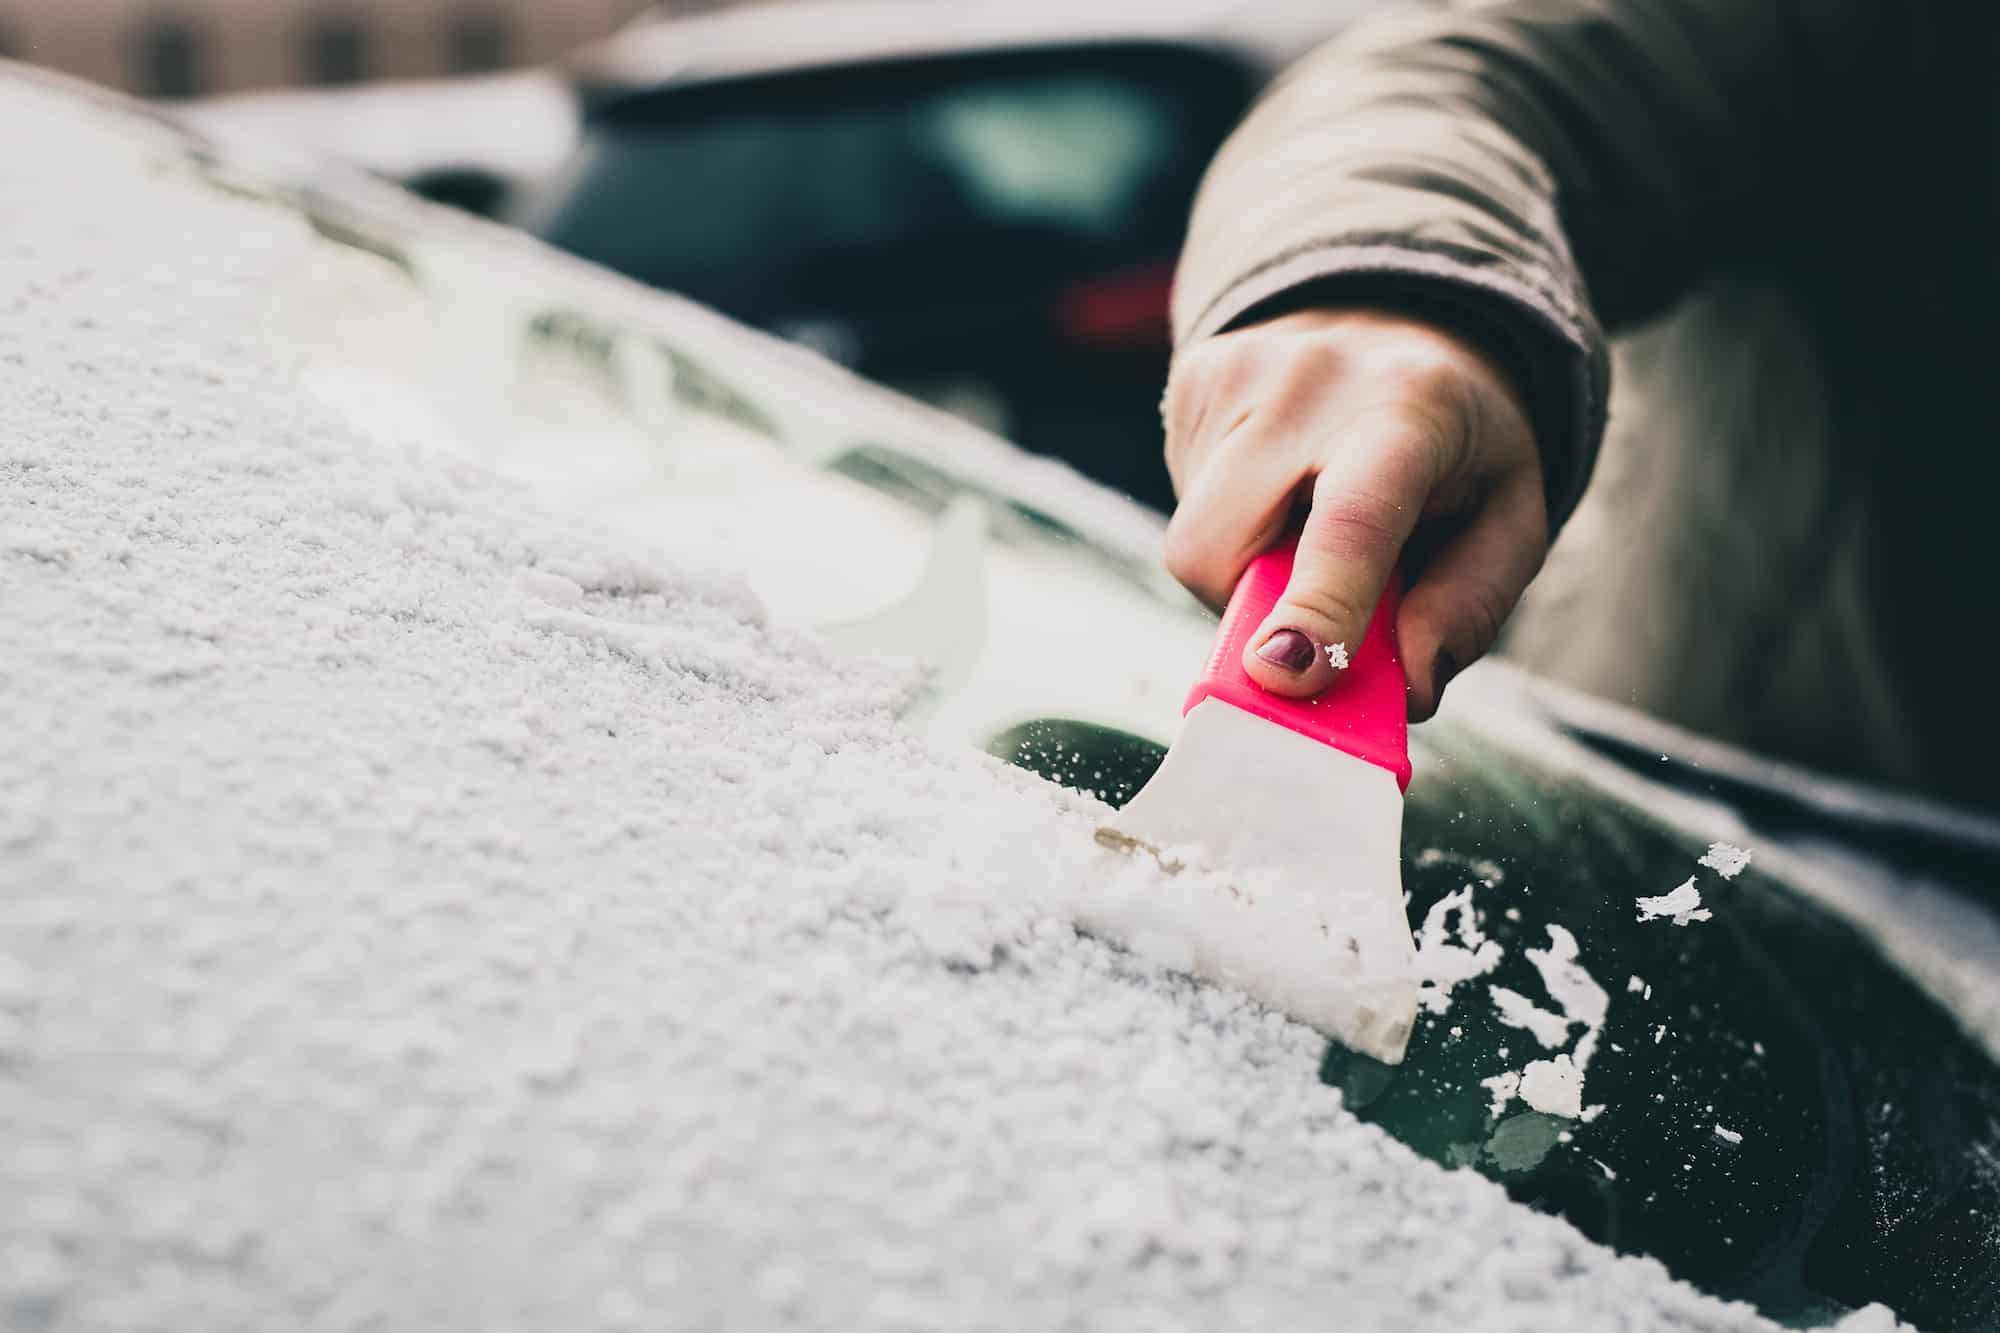 How to Remove Snow and Ice from Your Windshield Single Girl #39 s DIY